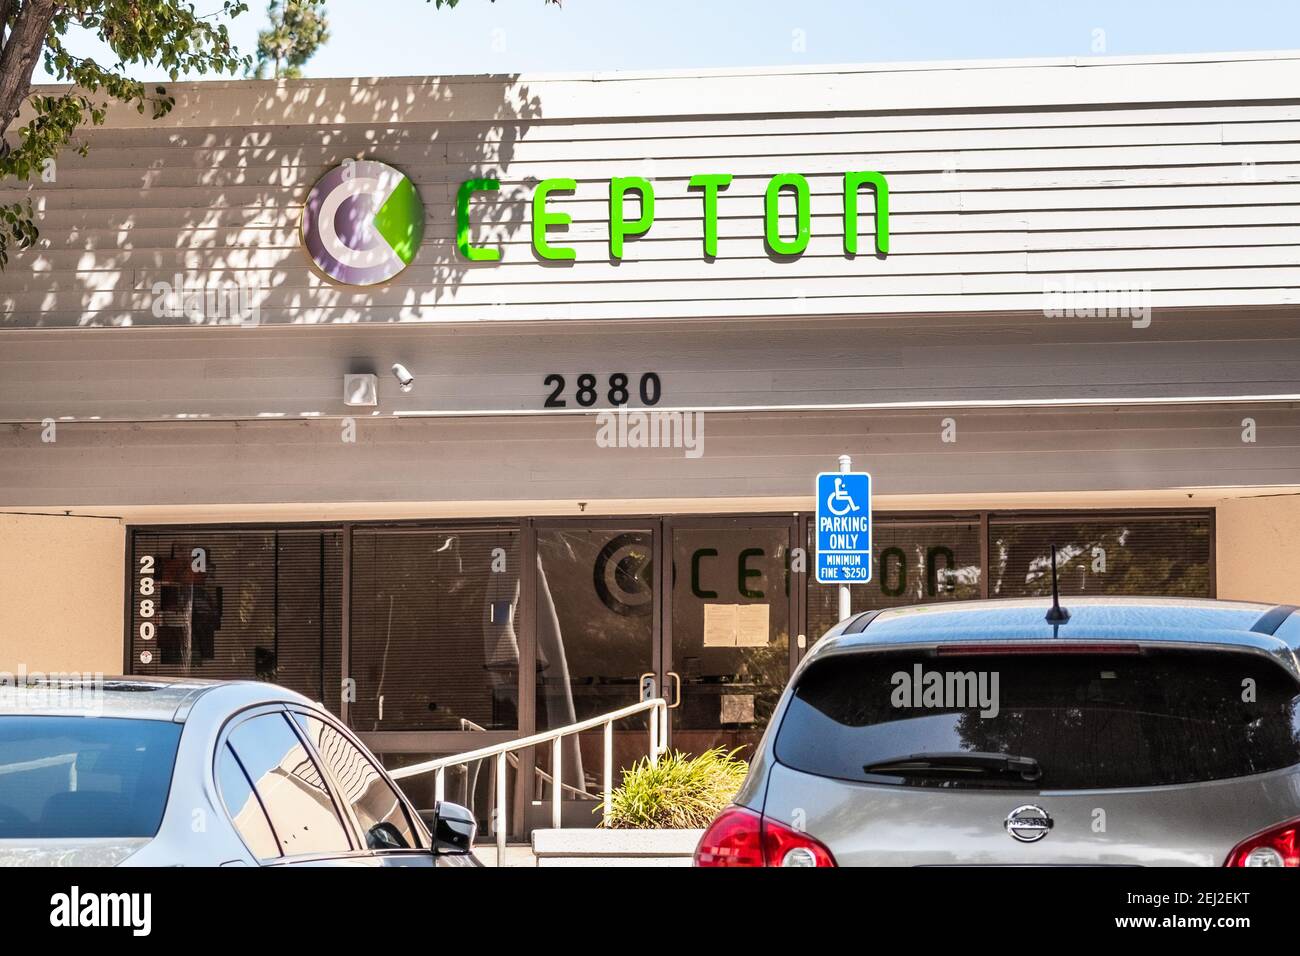 Sep 18, 2020 San Jose / CA / USA - Cepton headquarters in Silicon Valley; Cepton Technologies develops lidar-based solutions for autonomous driving, i Stock Photo